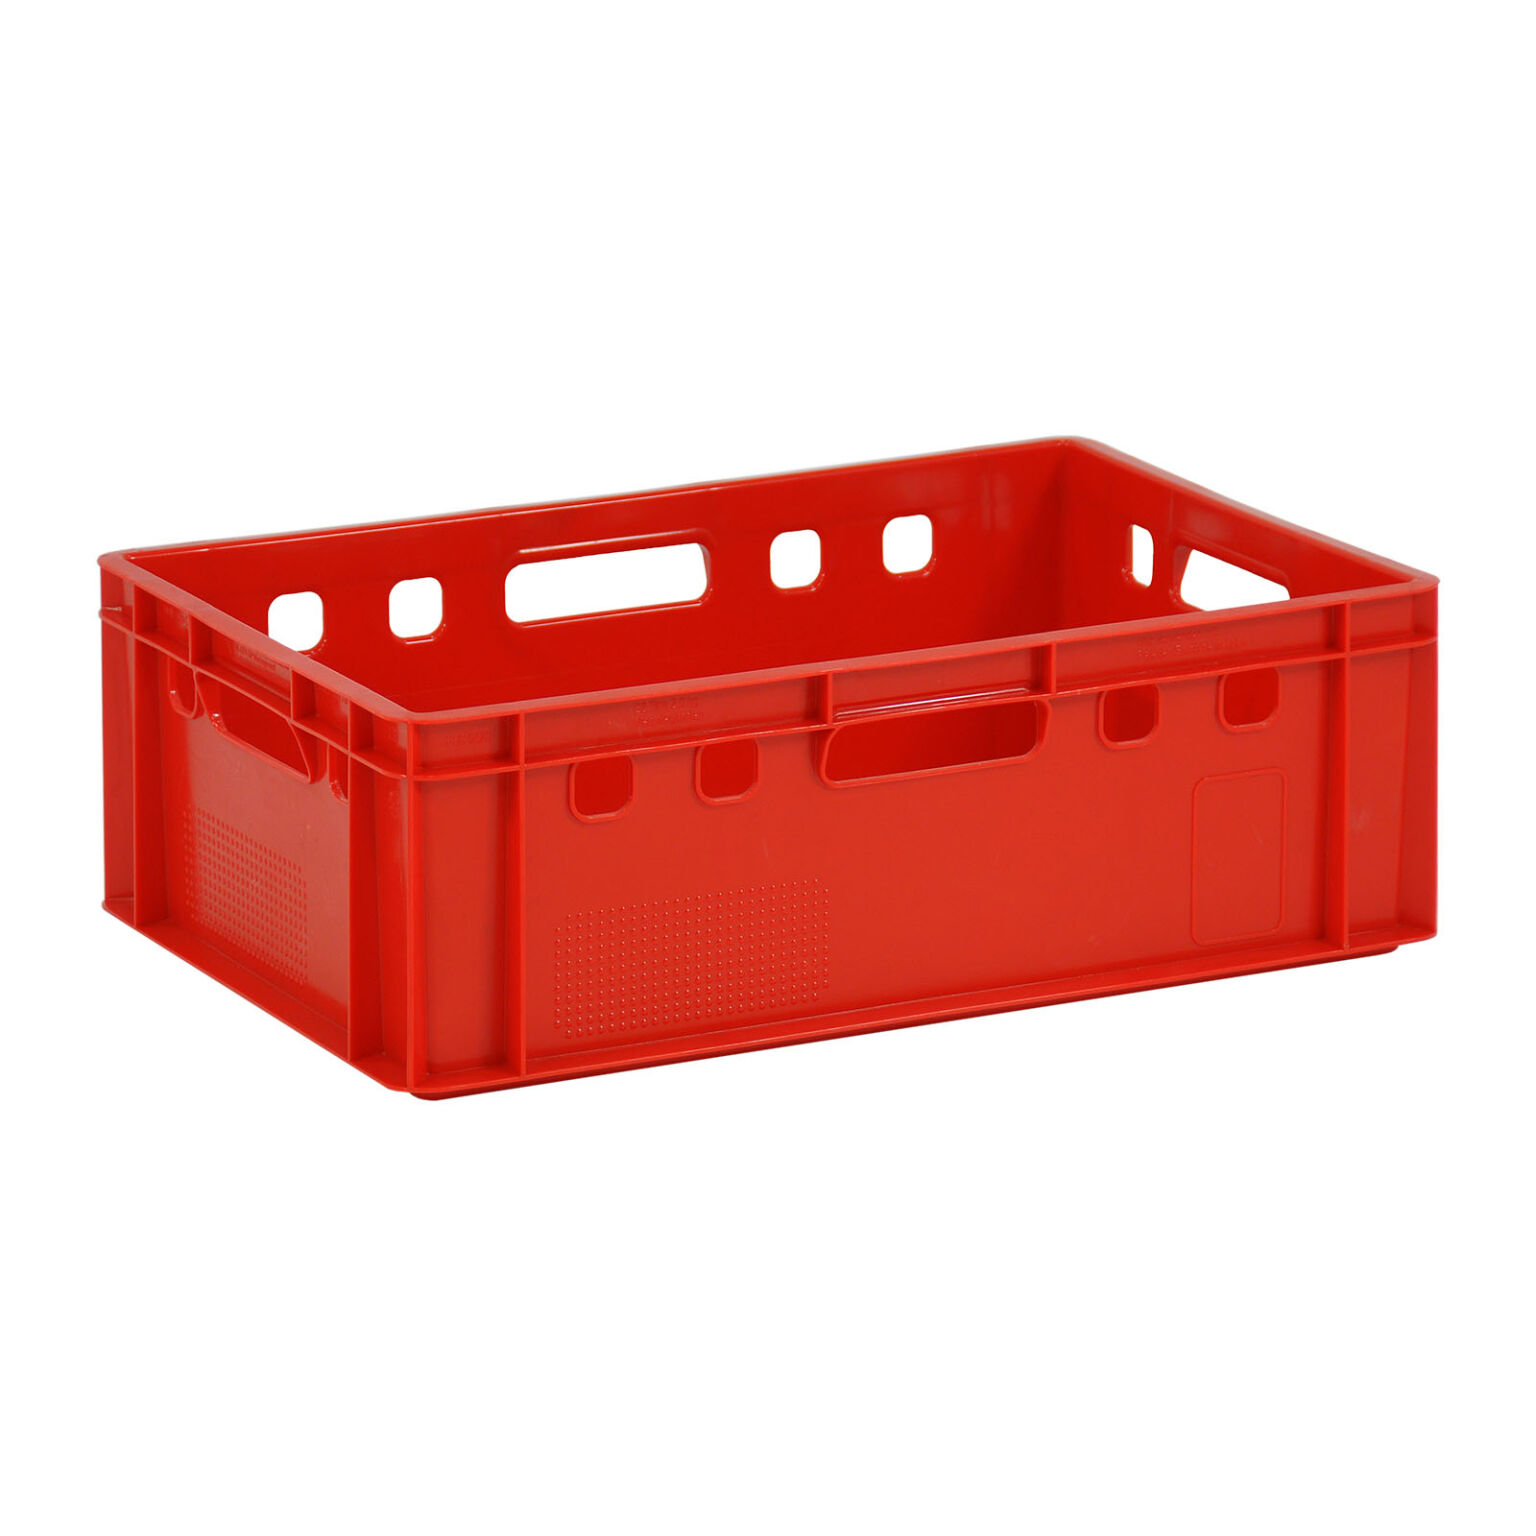 Stacking box plastic stackable e2 meat crate with open handles Type:  stackable